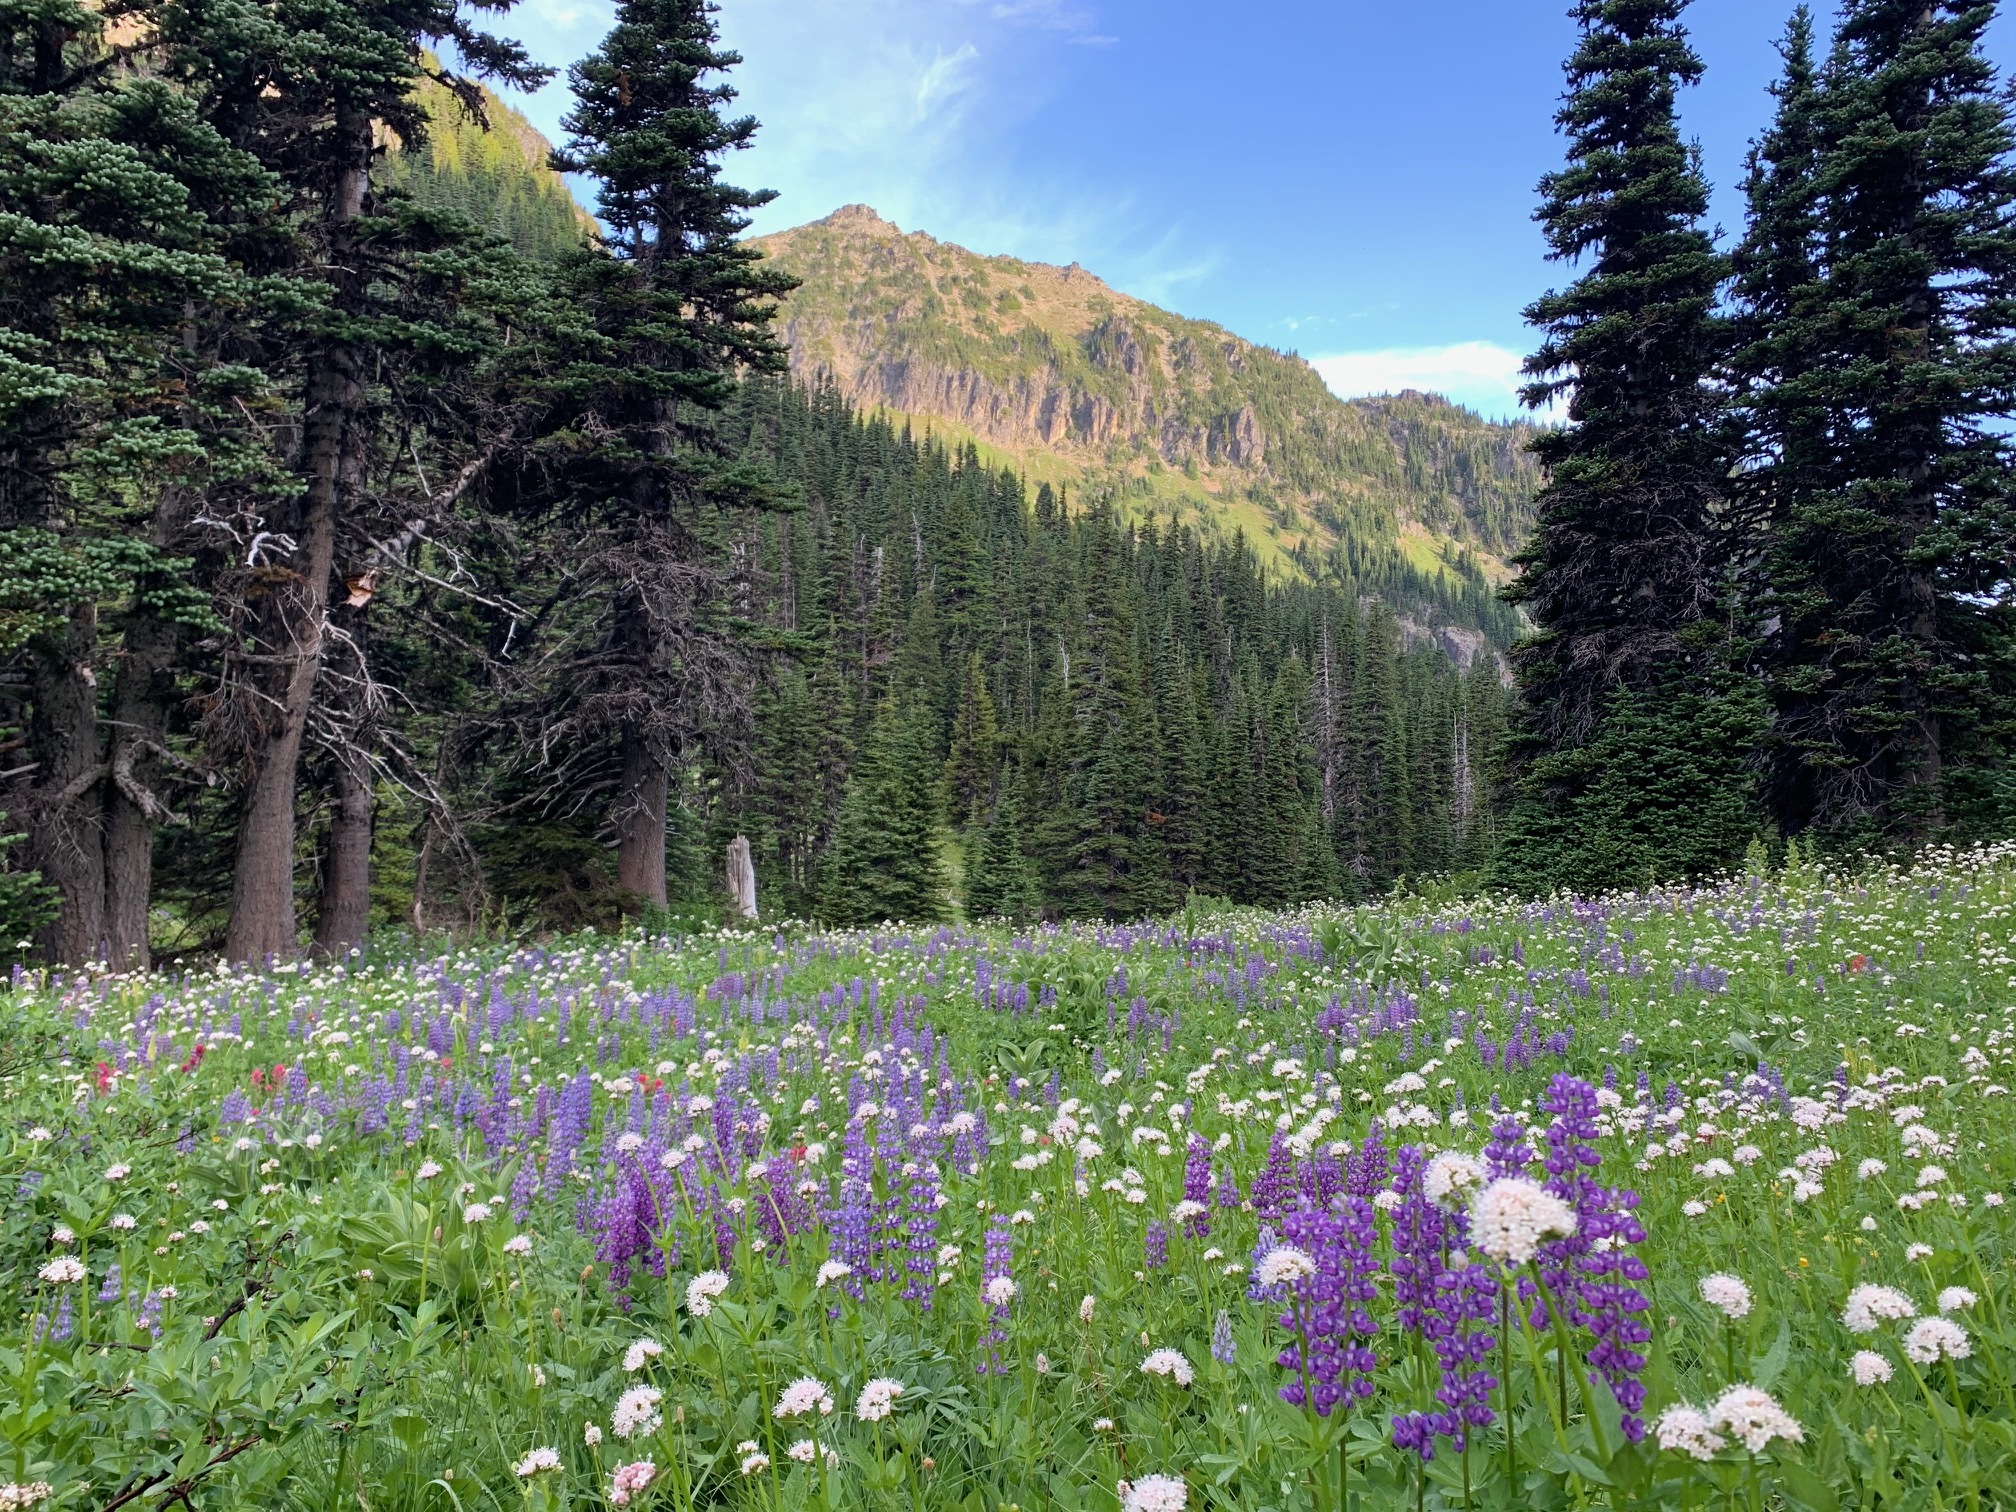 Colorful white and purple flowers fill a meadow next to a forest slope and rock ridge. 